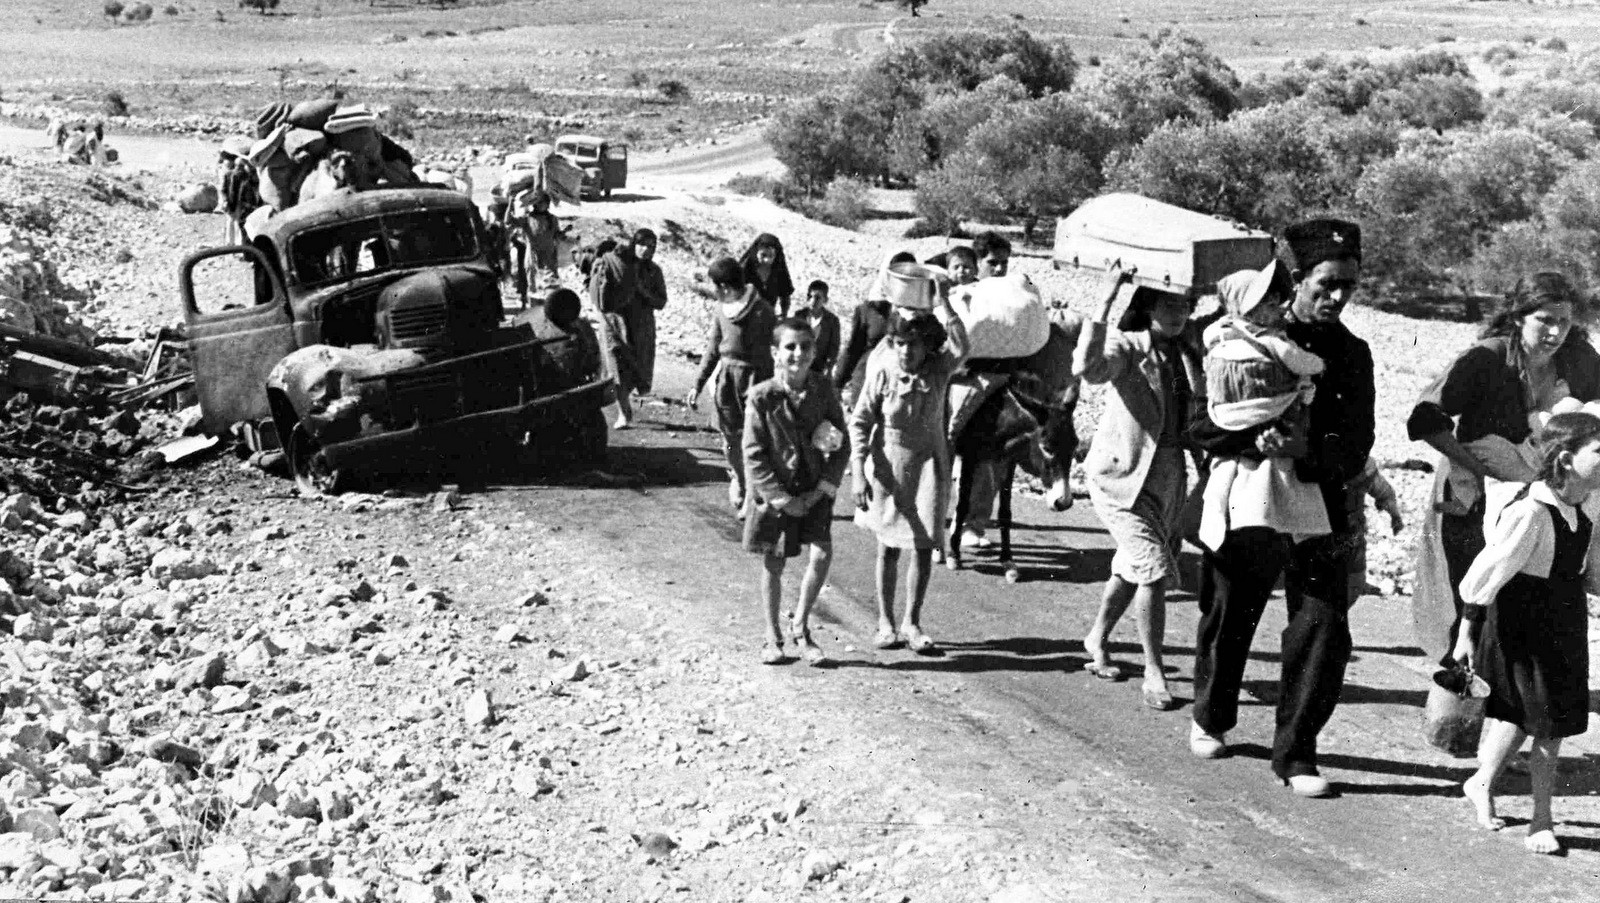 A group of struggling Arab refugees walk along the dusty road from Jerusalem to Lebanon, carrying their meager belongings with them, Nov. 9, 1948. The Arabs have been driven from their homes by Jewish attacks in Galilee. (AP/Pringle)